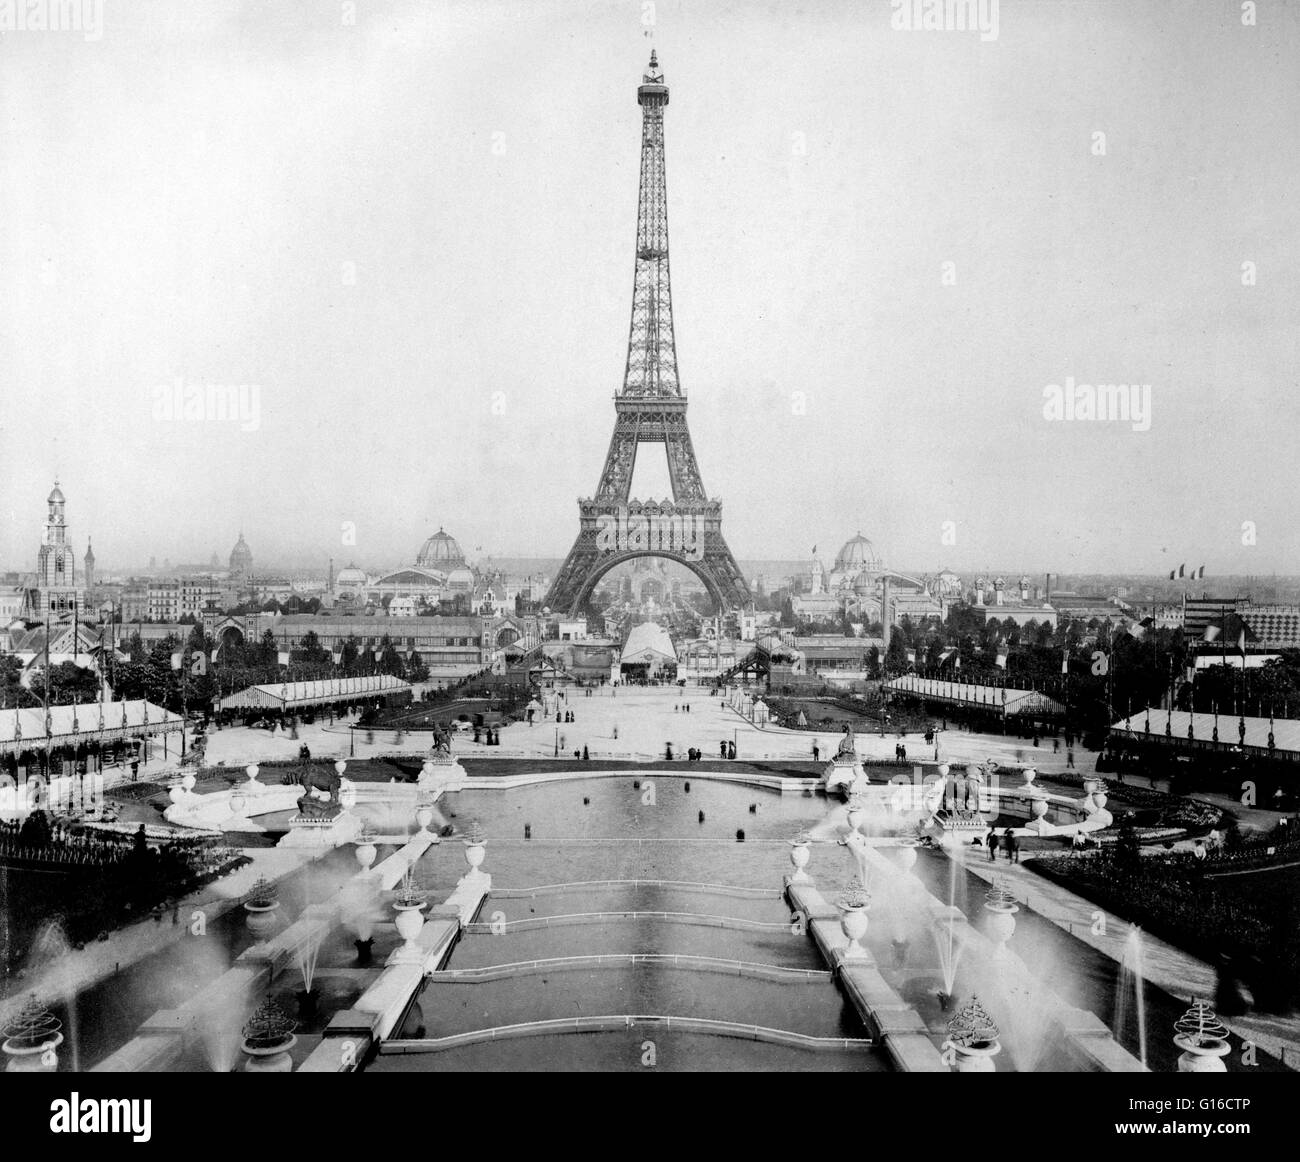 View of the Eiffel Tower and exposition buildings on the Champ de Mars as seen from Trocadéro Palace, Paris Exposition, 1889. The Eiffel Tower (La Tour Eiffel) is an iron lattice tower located on the Champ de Mars in Paris. It was named after the engineer Stock Photo